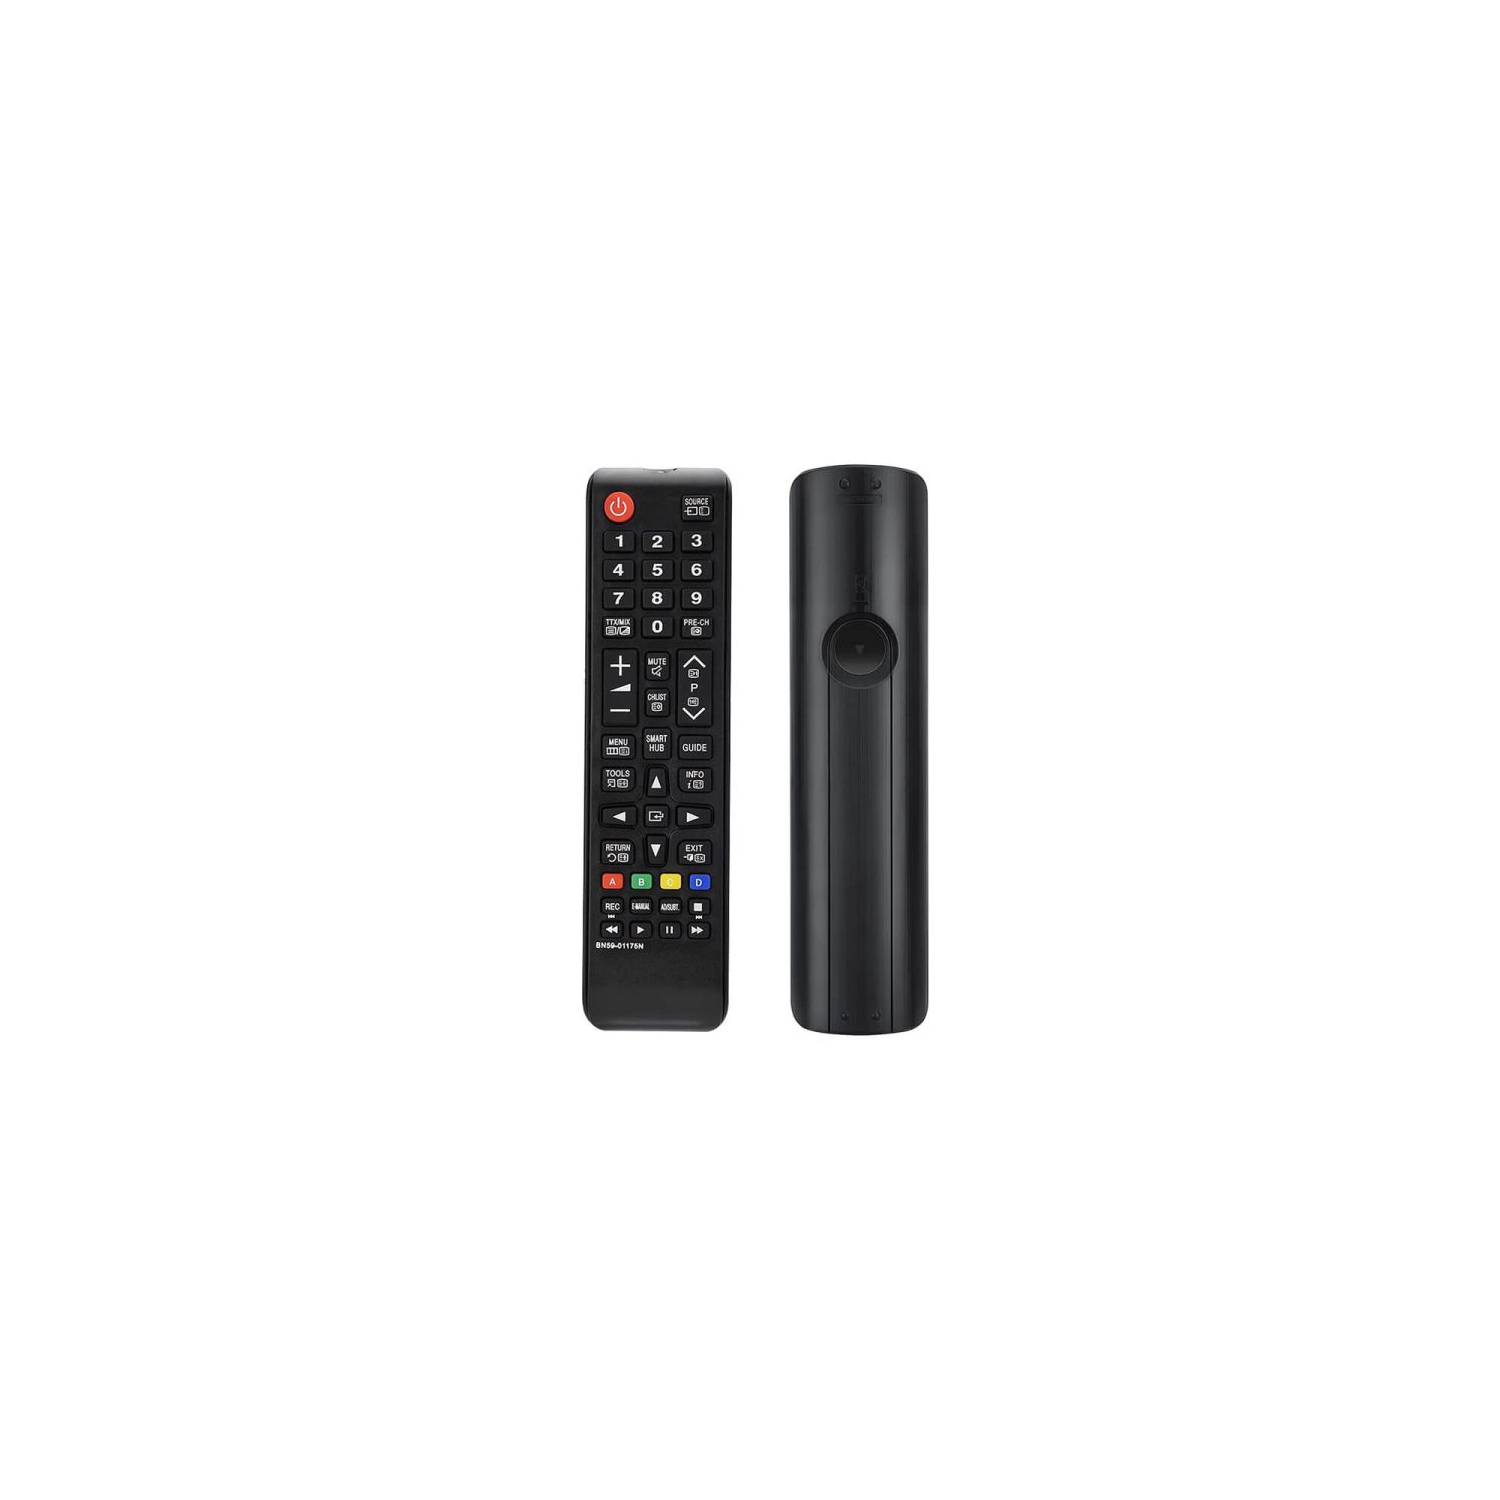 BN59-01175N Replaced Remote fit for Samsung TV BN59-01199F TM1240A UE46EH5000 AA59-00602A BN59-00865A UE55MU8000 49MU6400 40UE6400 BN59-01015A